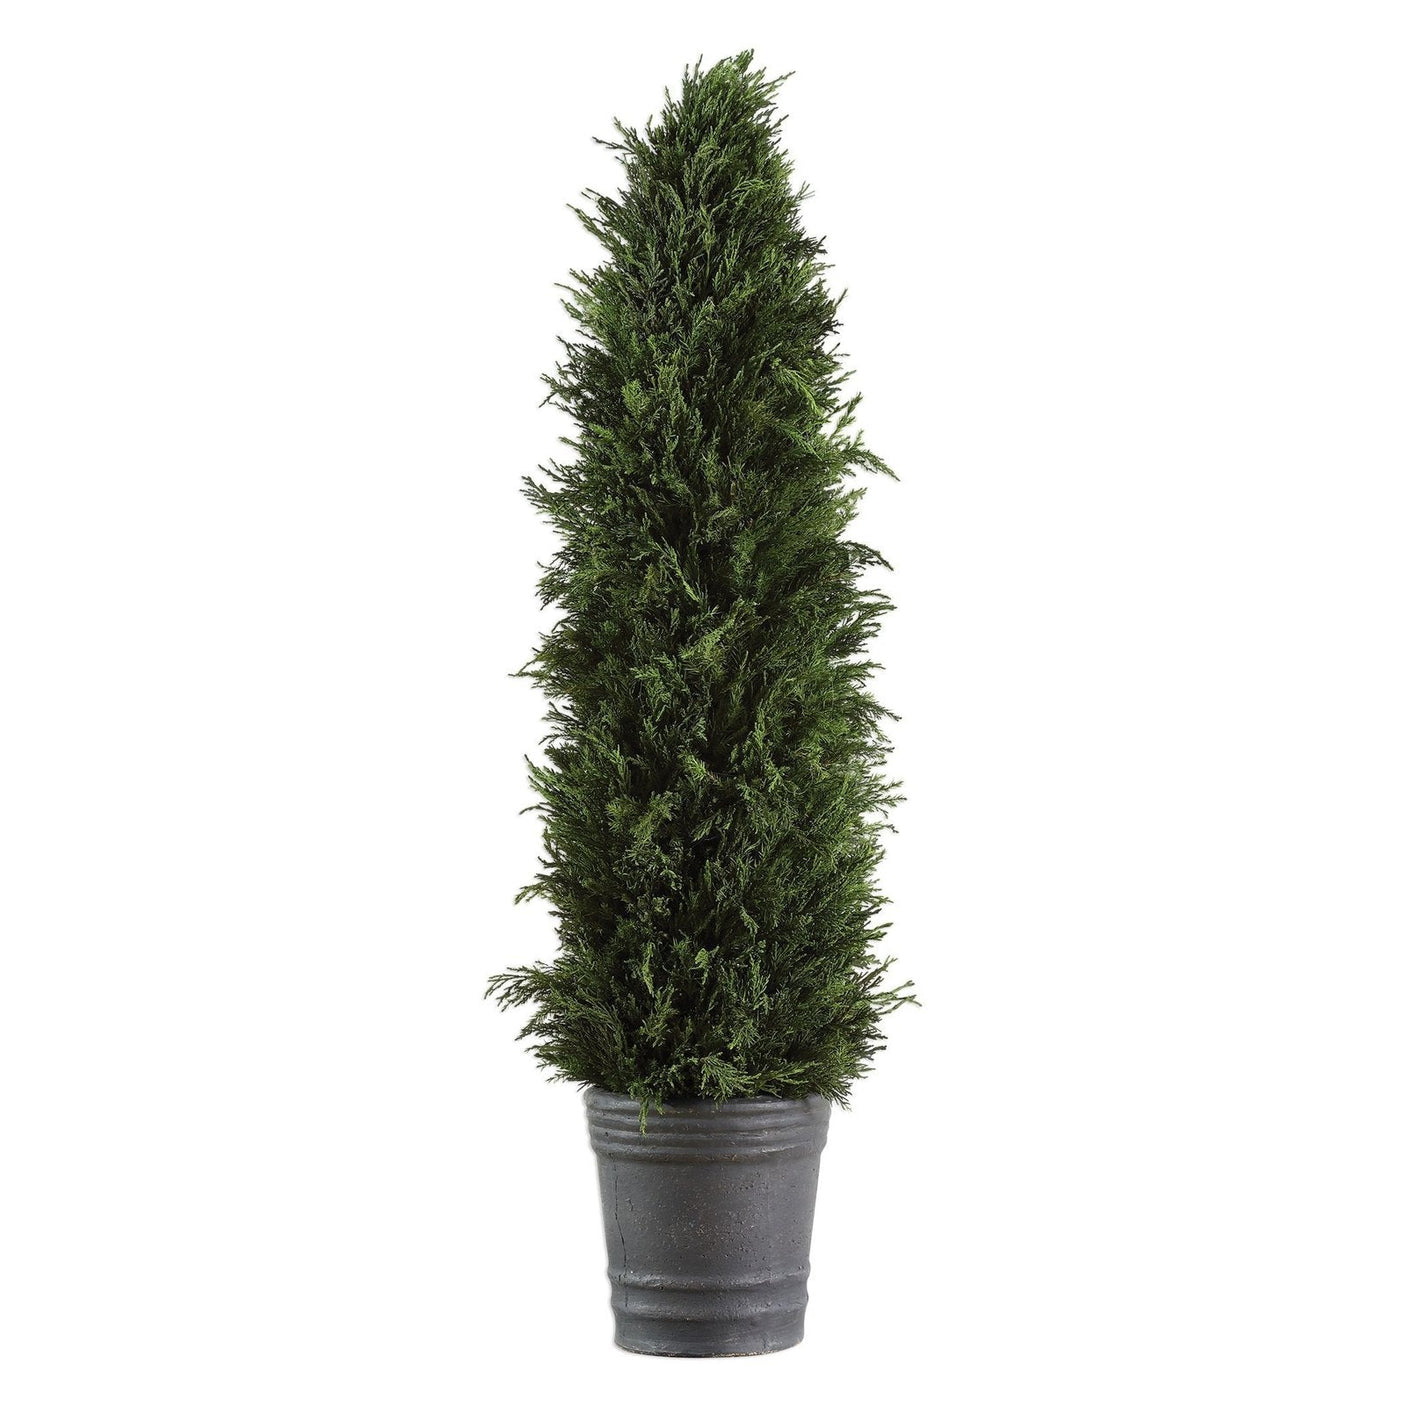 Uttermost Cypress Cone Topiary - Home Elegance USA